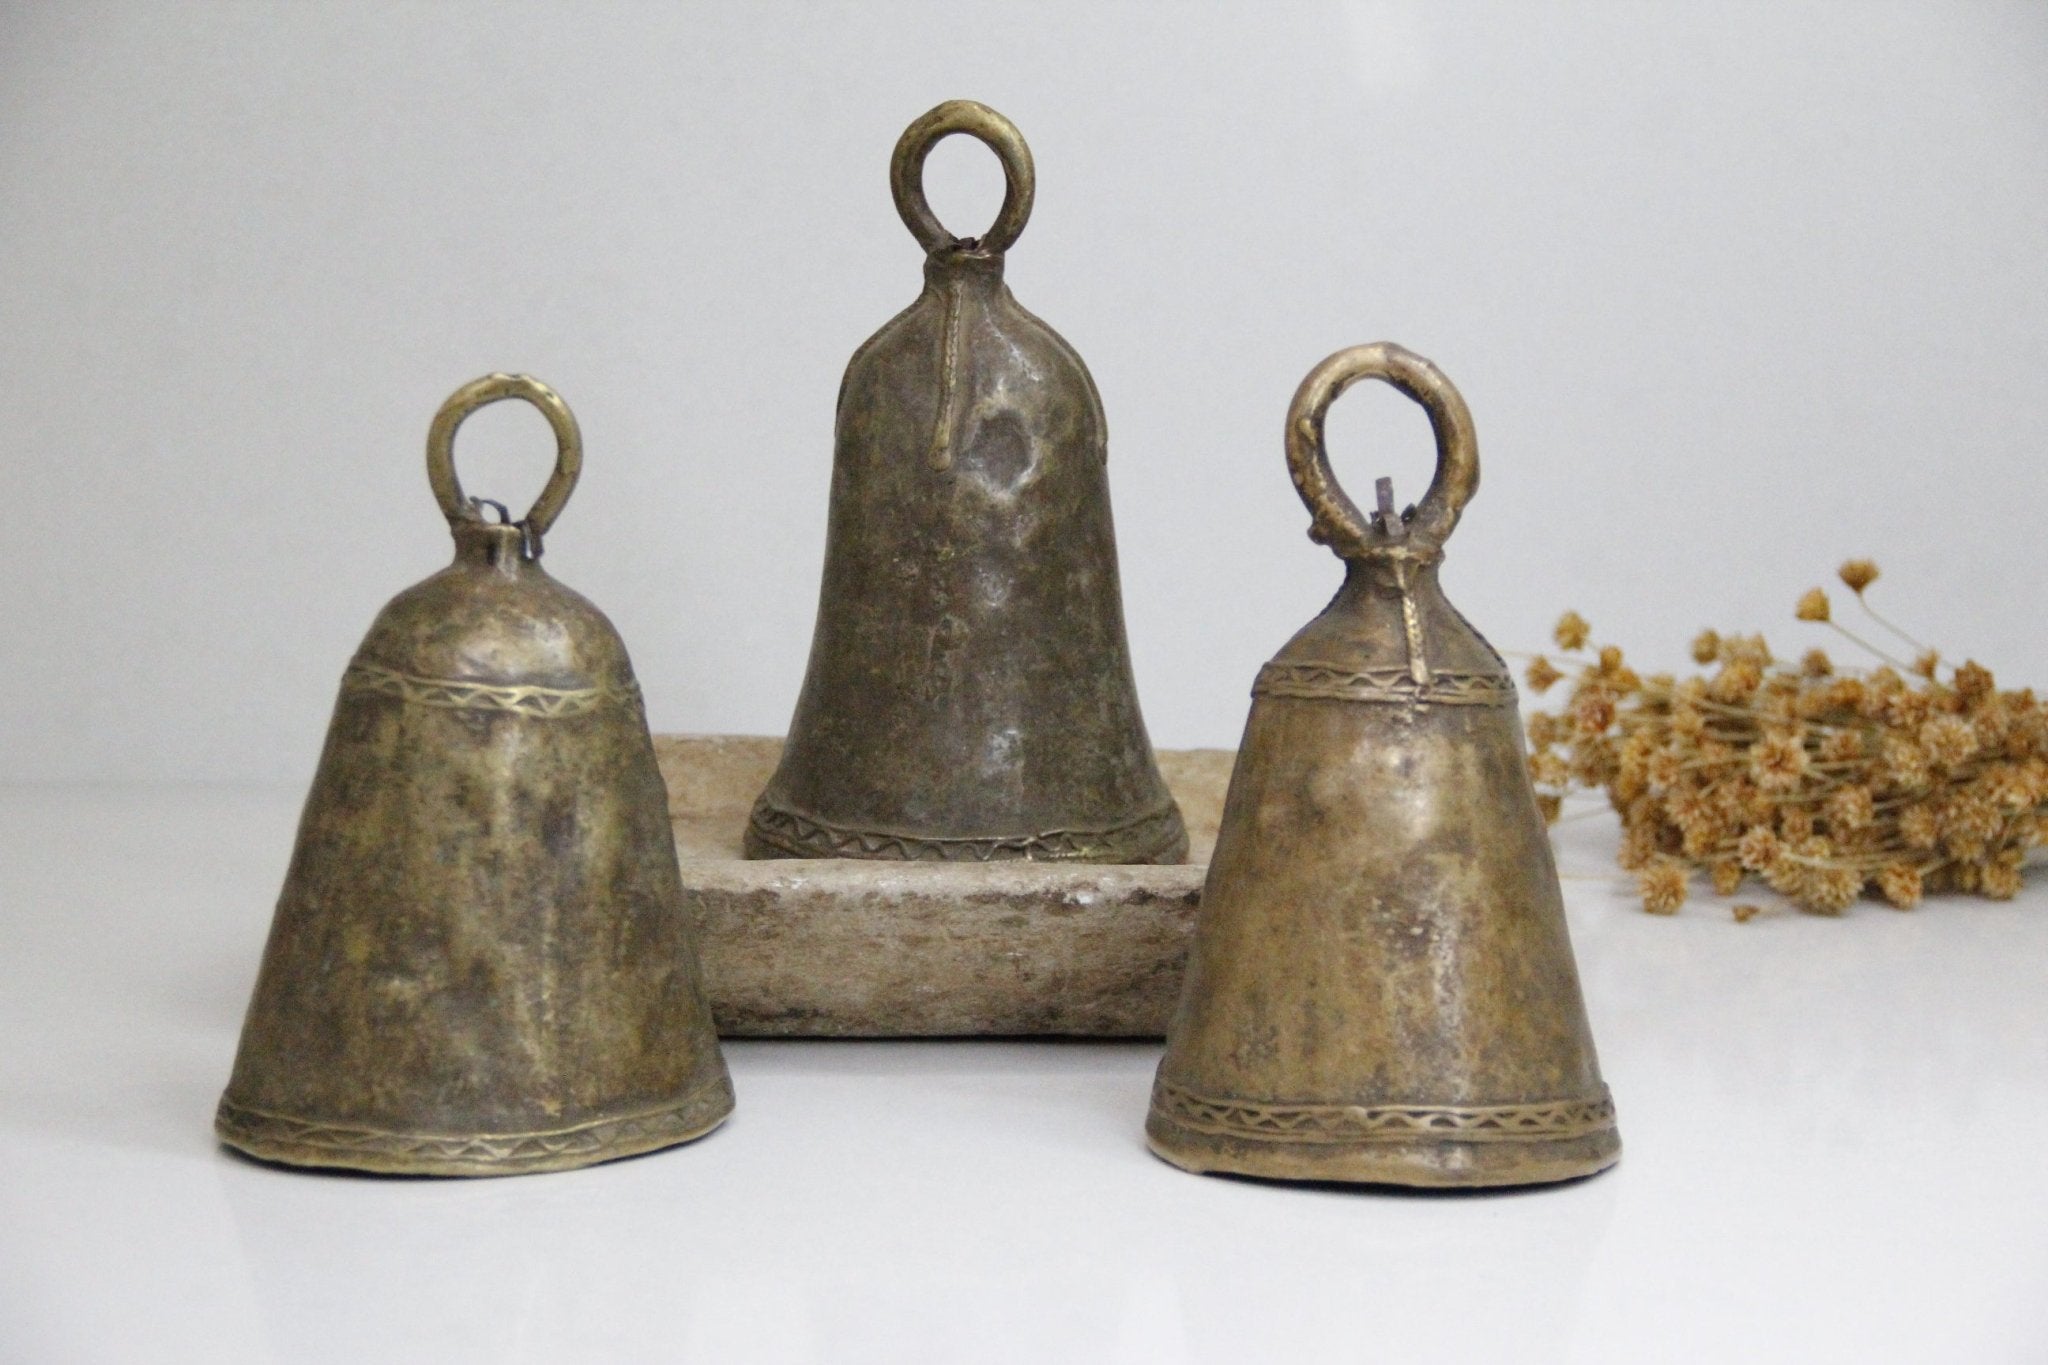 Antique African Cow Bell - Large - Debra Hall Lifestyle